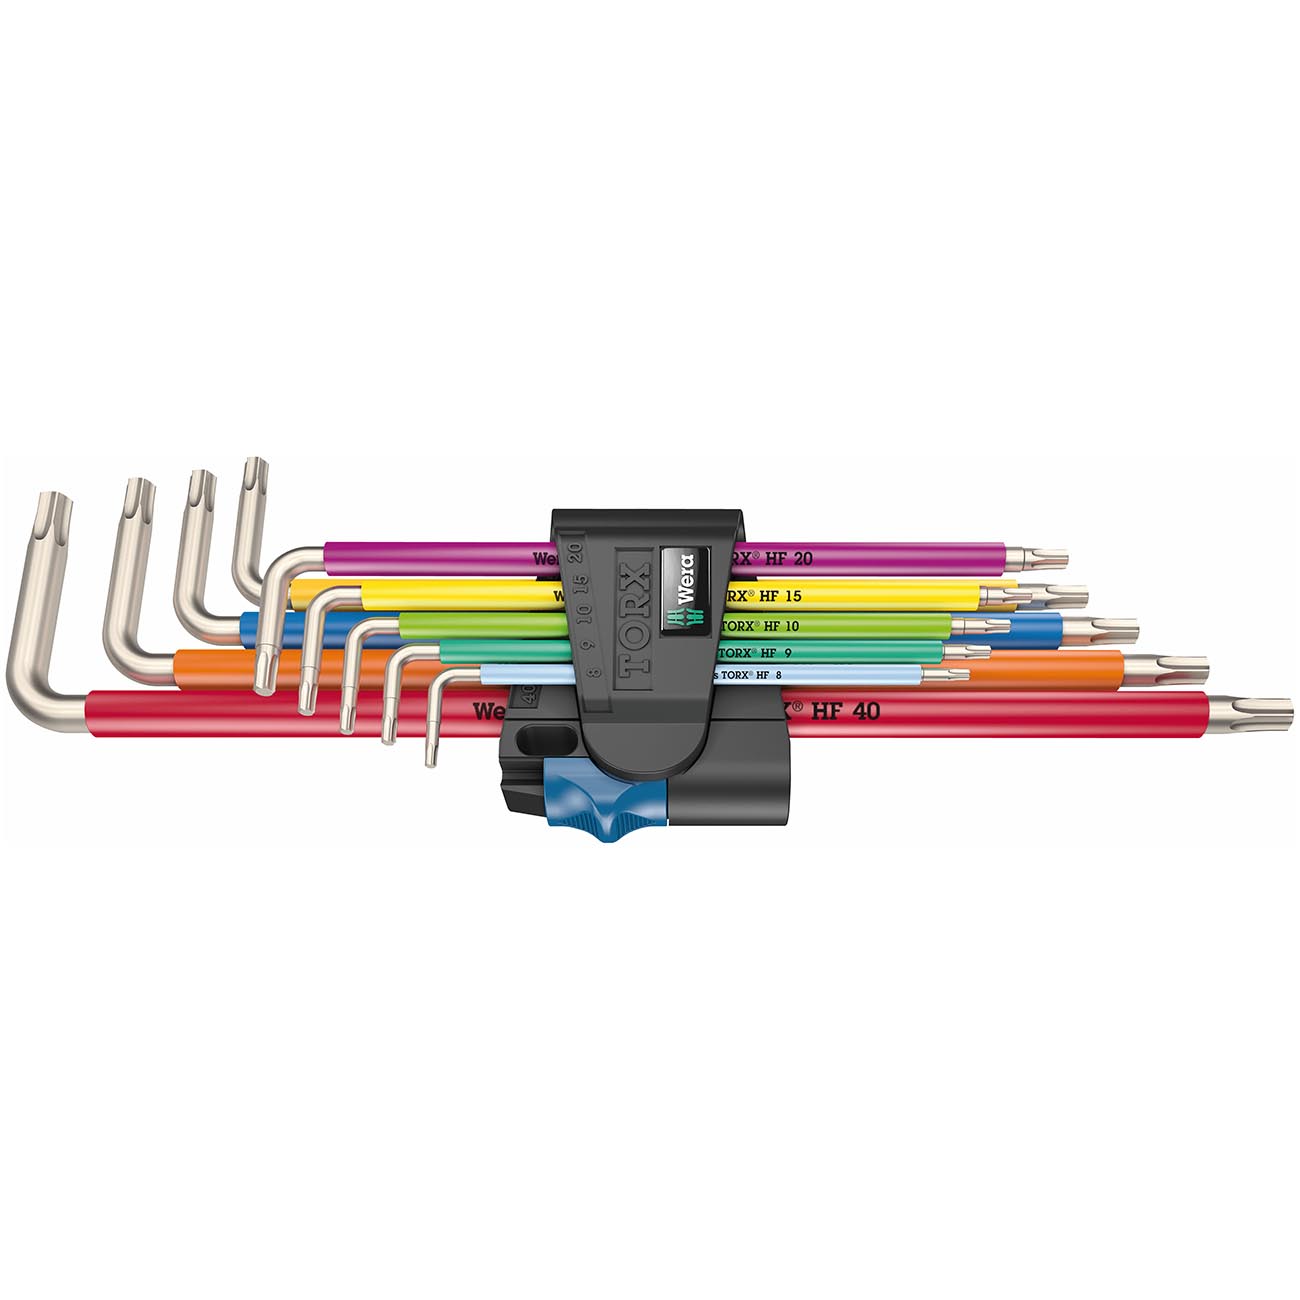 Wera Multicolor TORX L-Key Wrench Set with Holding Function (9-Piece Set)